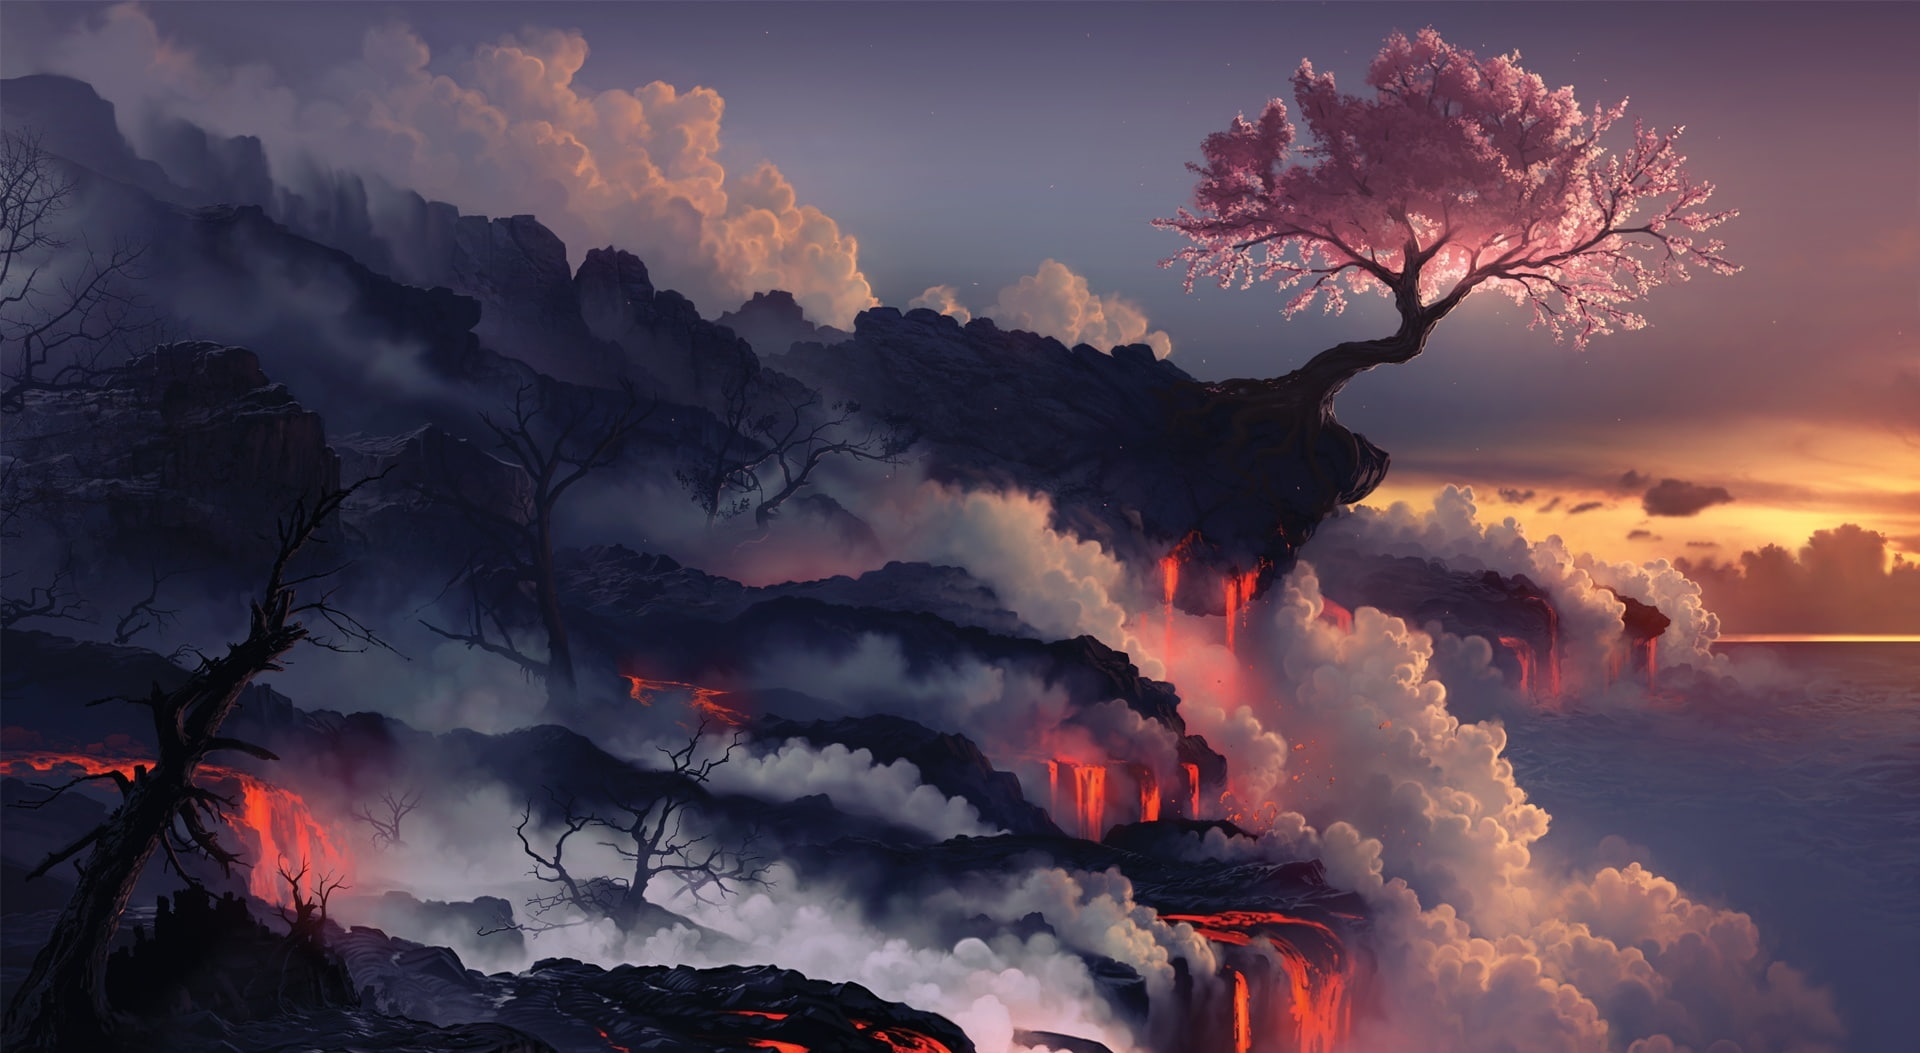 Scorched Earth, white clouds, Artistic, Fantasy, beauty in nature